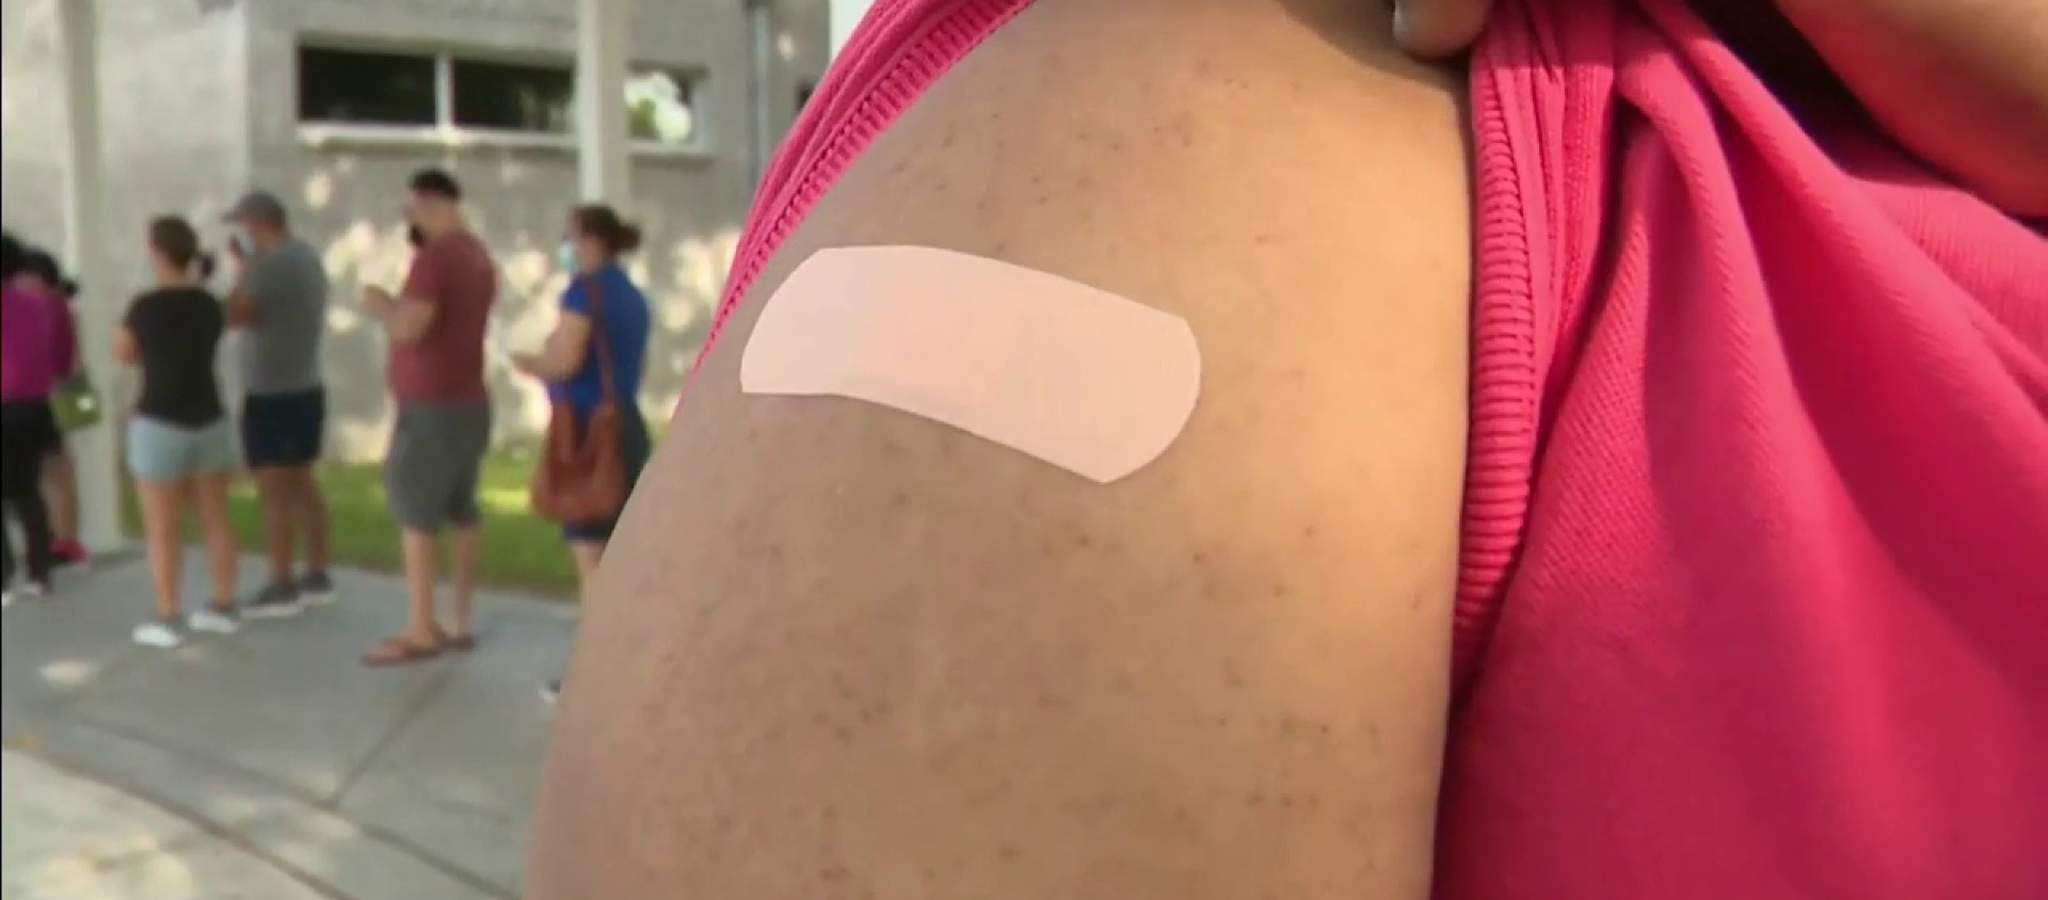 Hundreds receive 1st COVID-19 vaccine dose at temporary sites in Cutler Bay, Miami’s Model City